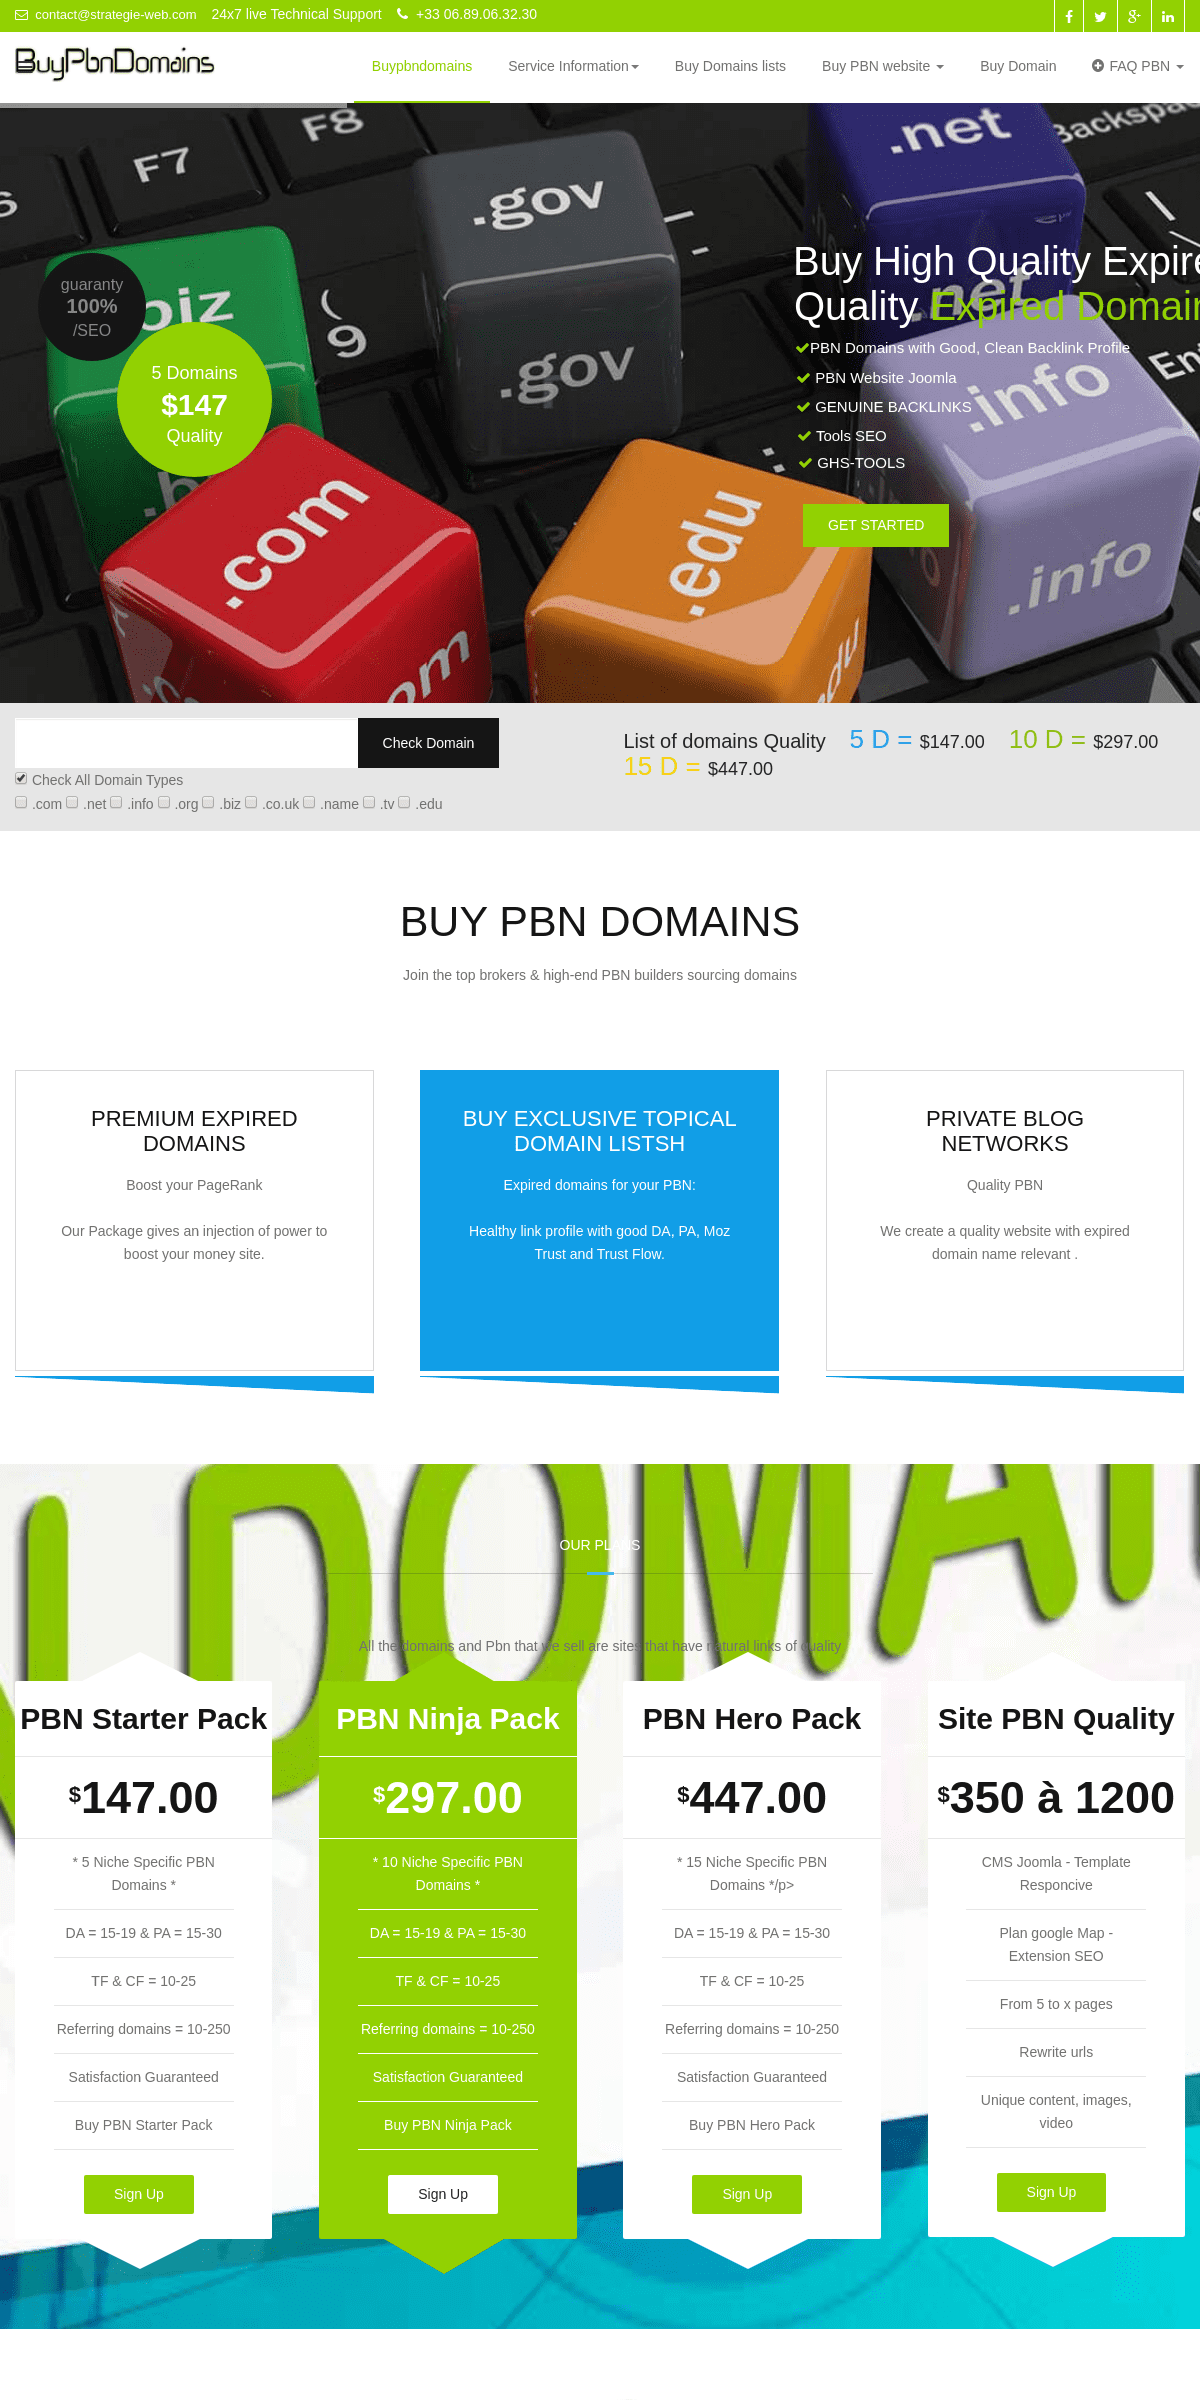 A complete backup of buypbndomains.com